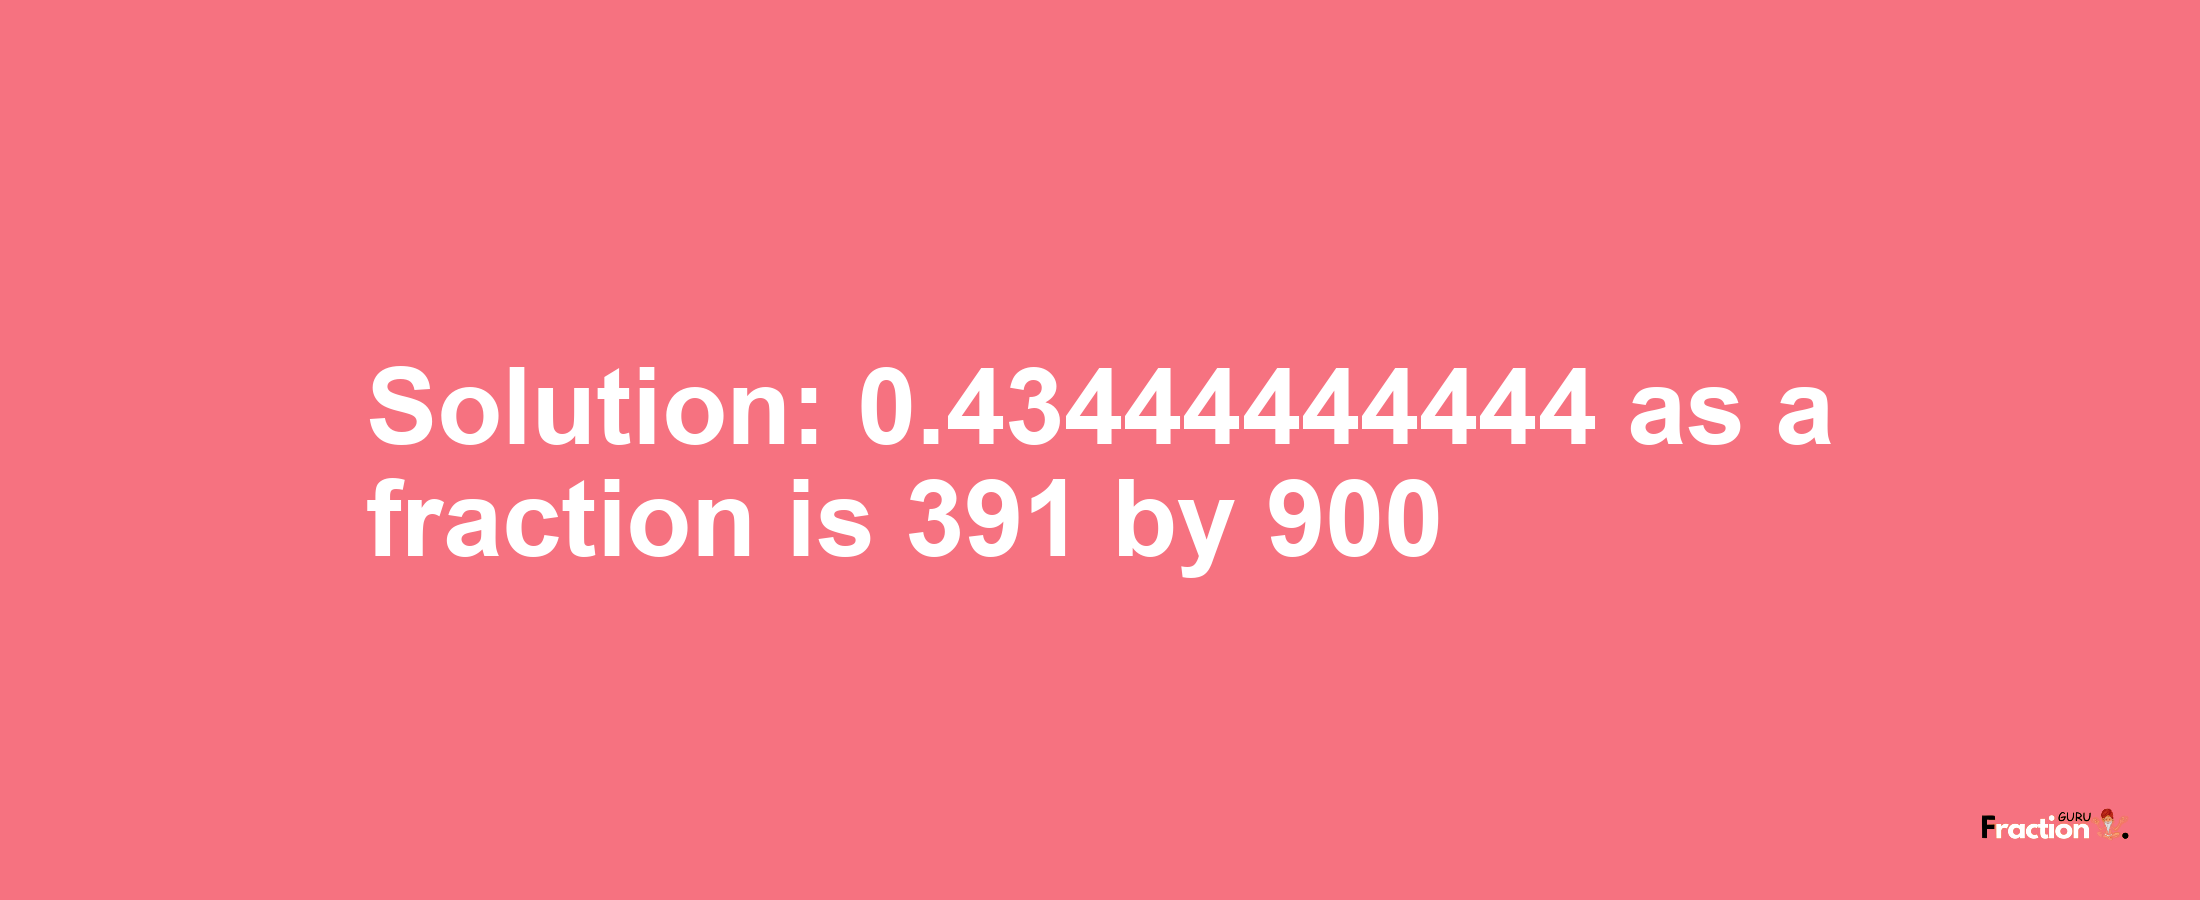 Solution:0.43444444444 as a fraction is 391/900